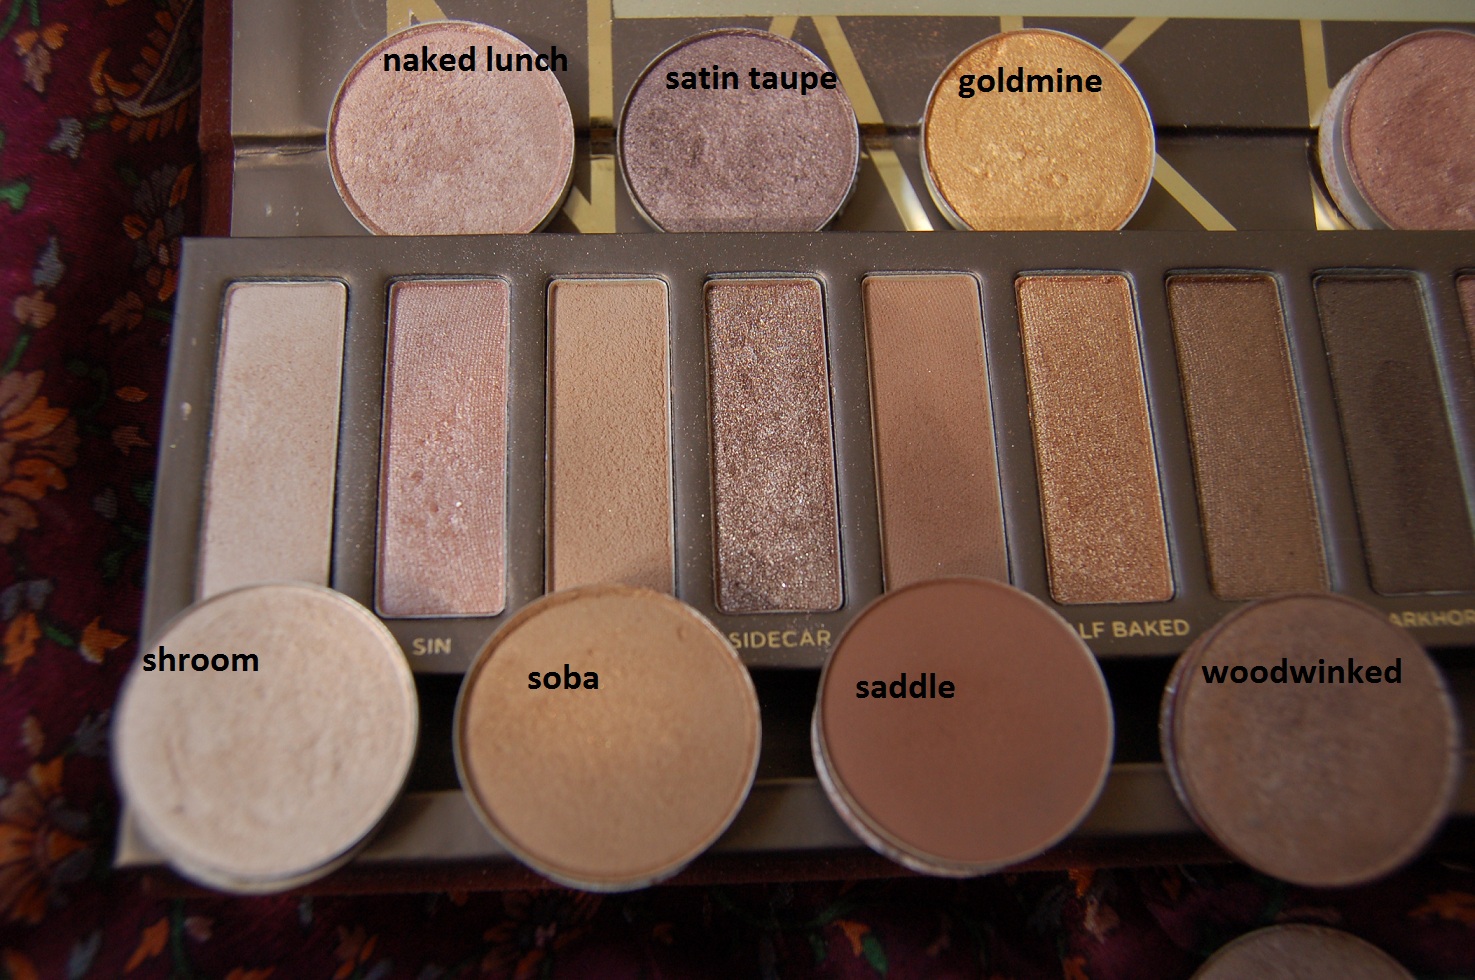 An Eye Makeup Addicts Blog: Urban Decay Naked Palette Vs 